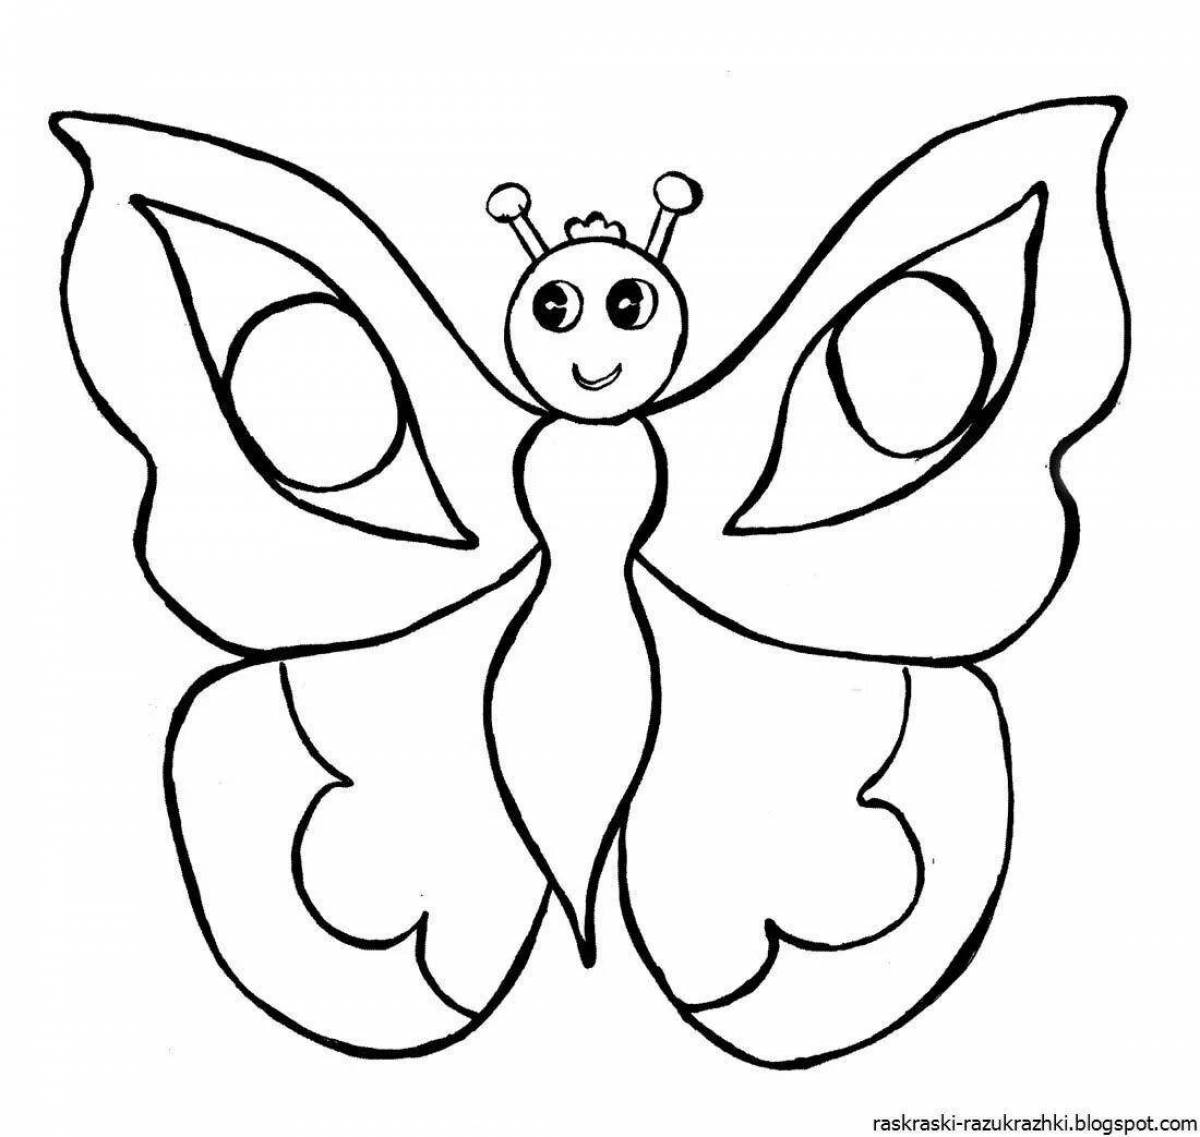 Butterfly live coloring for children 5-6 years old